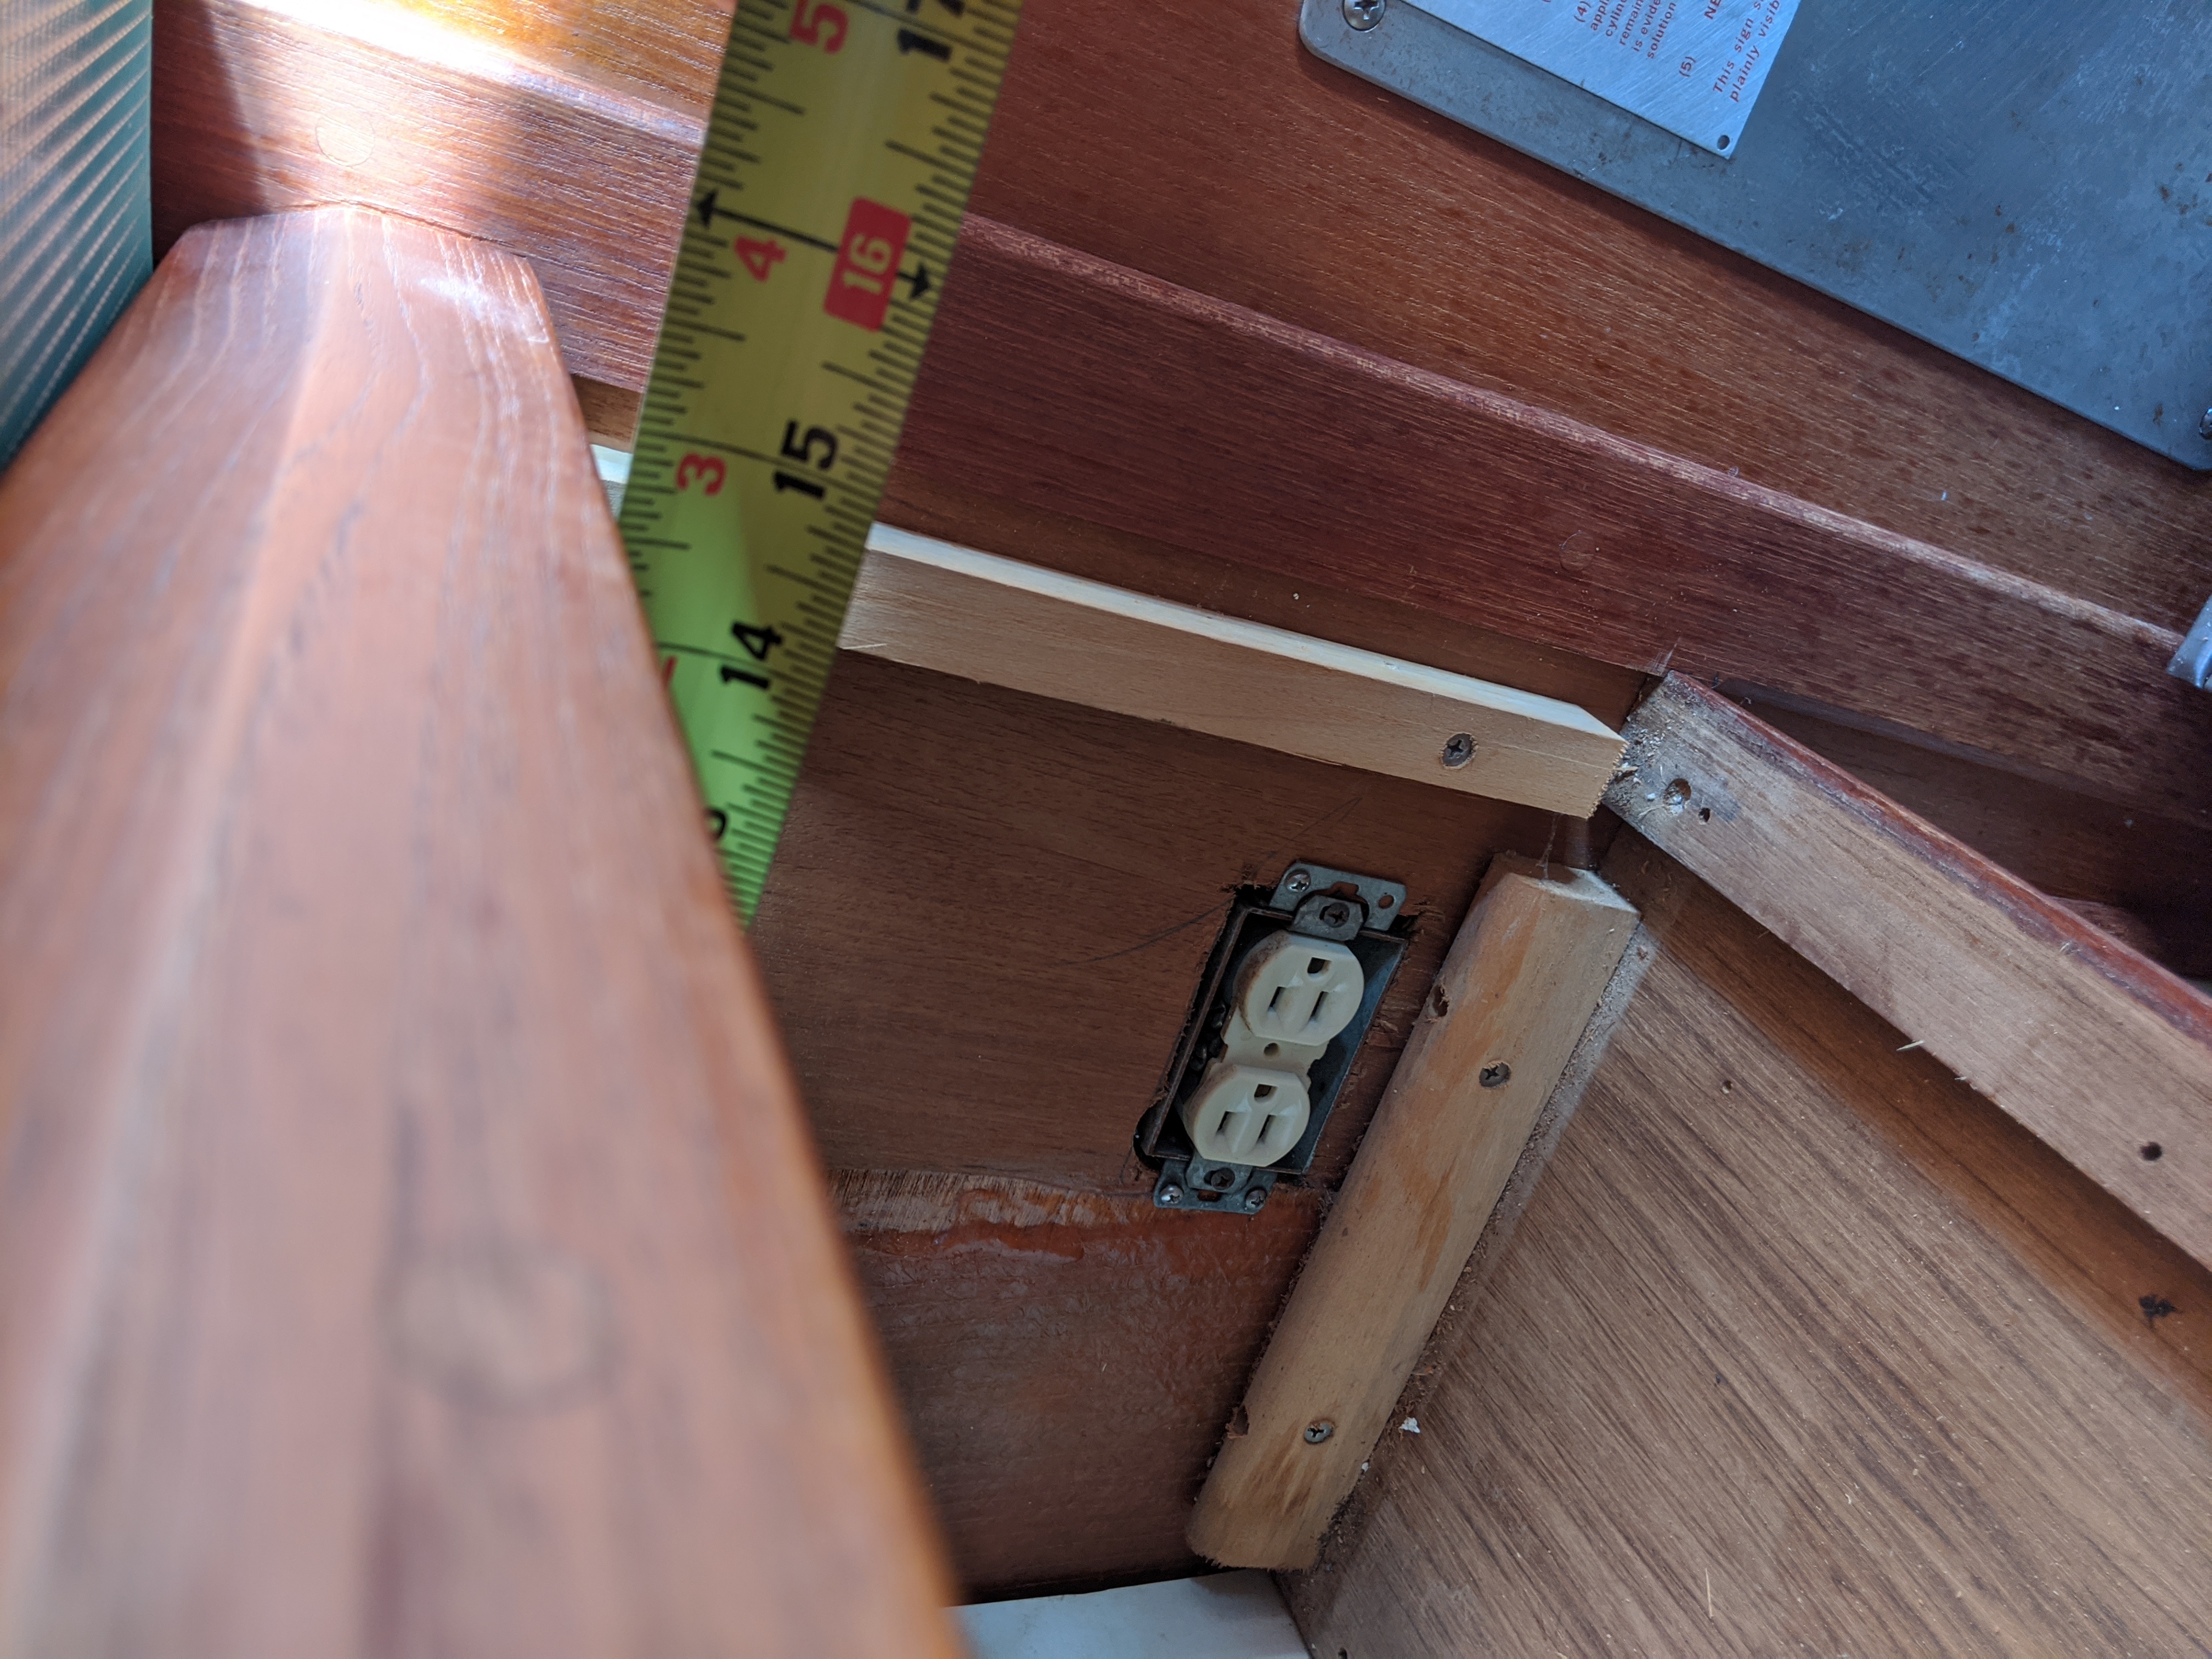 Cabinet depth on top